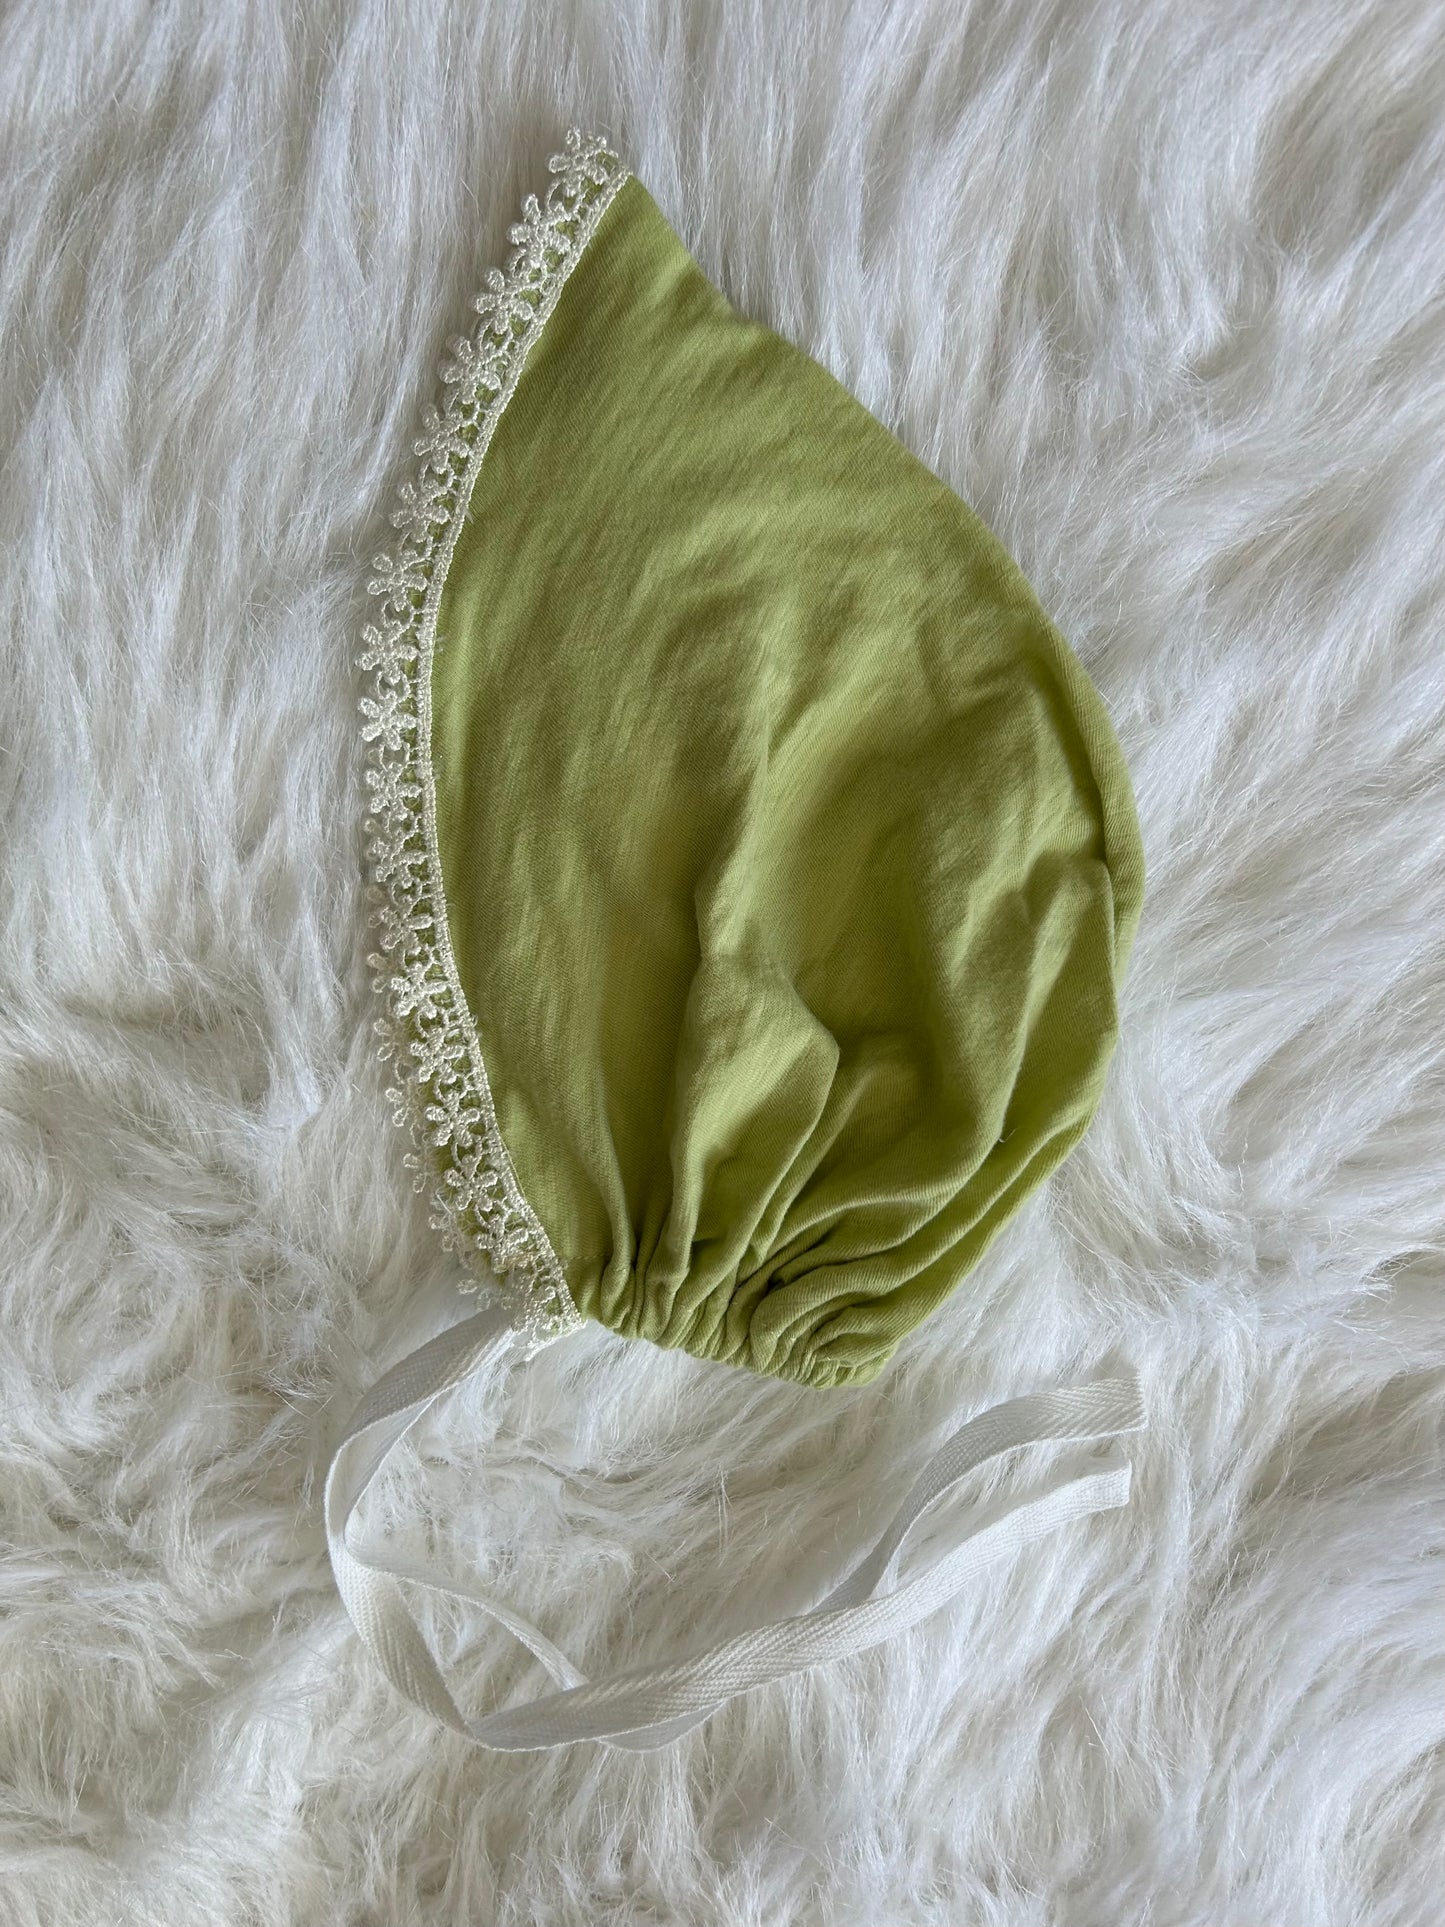 100% cotton lime green with floral trim.